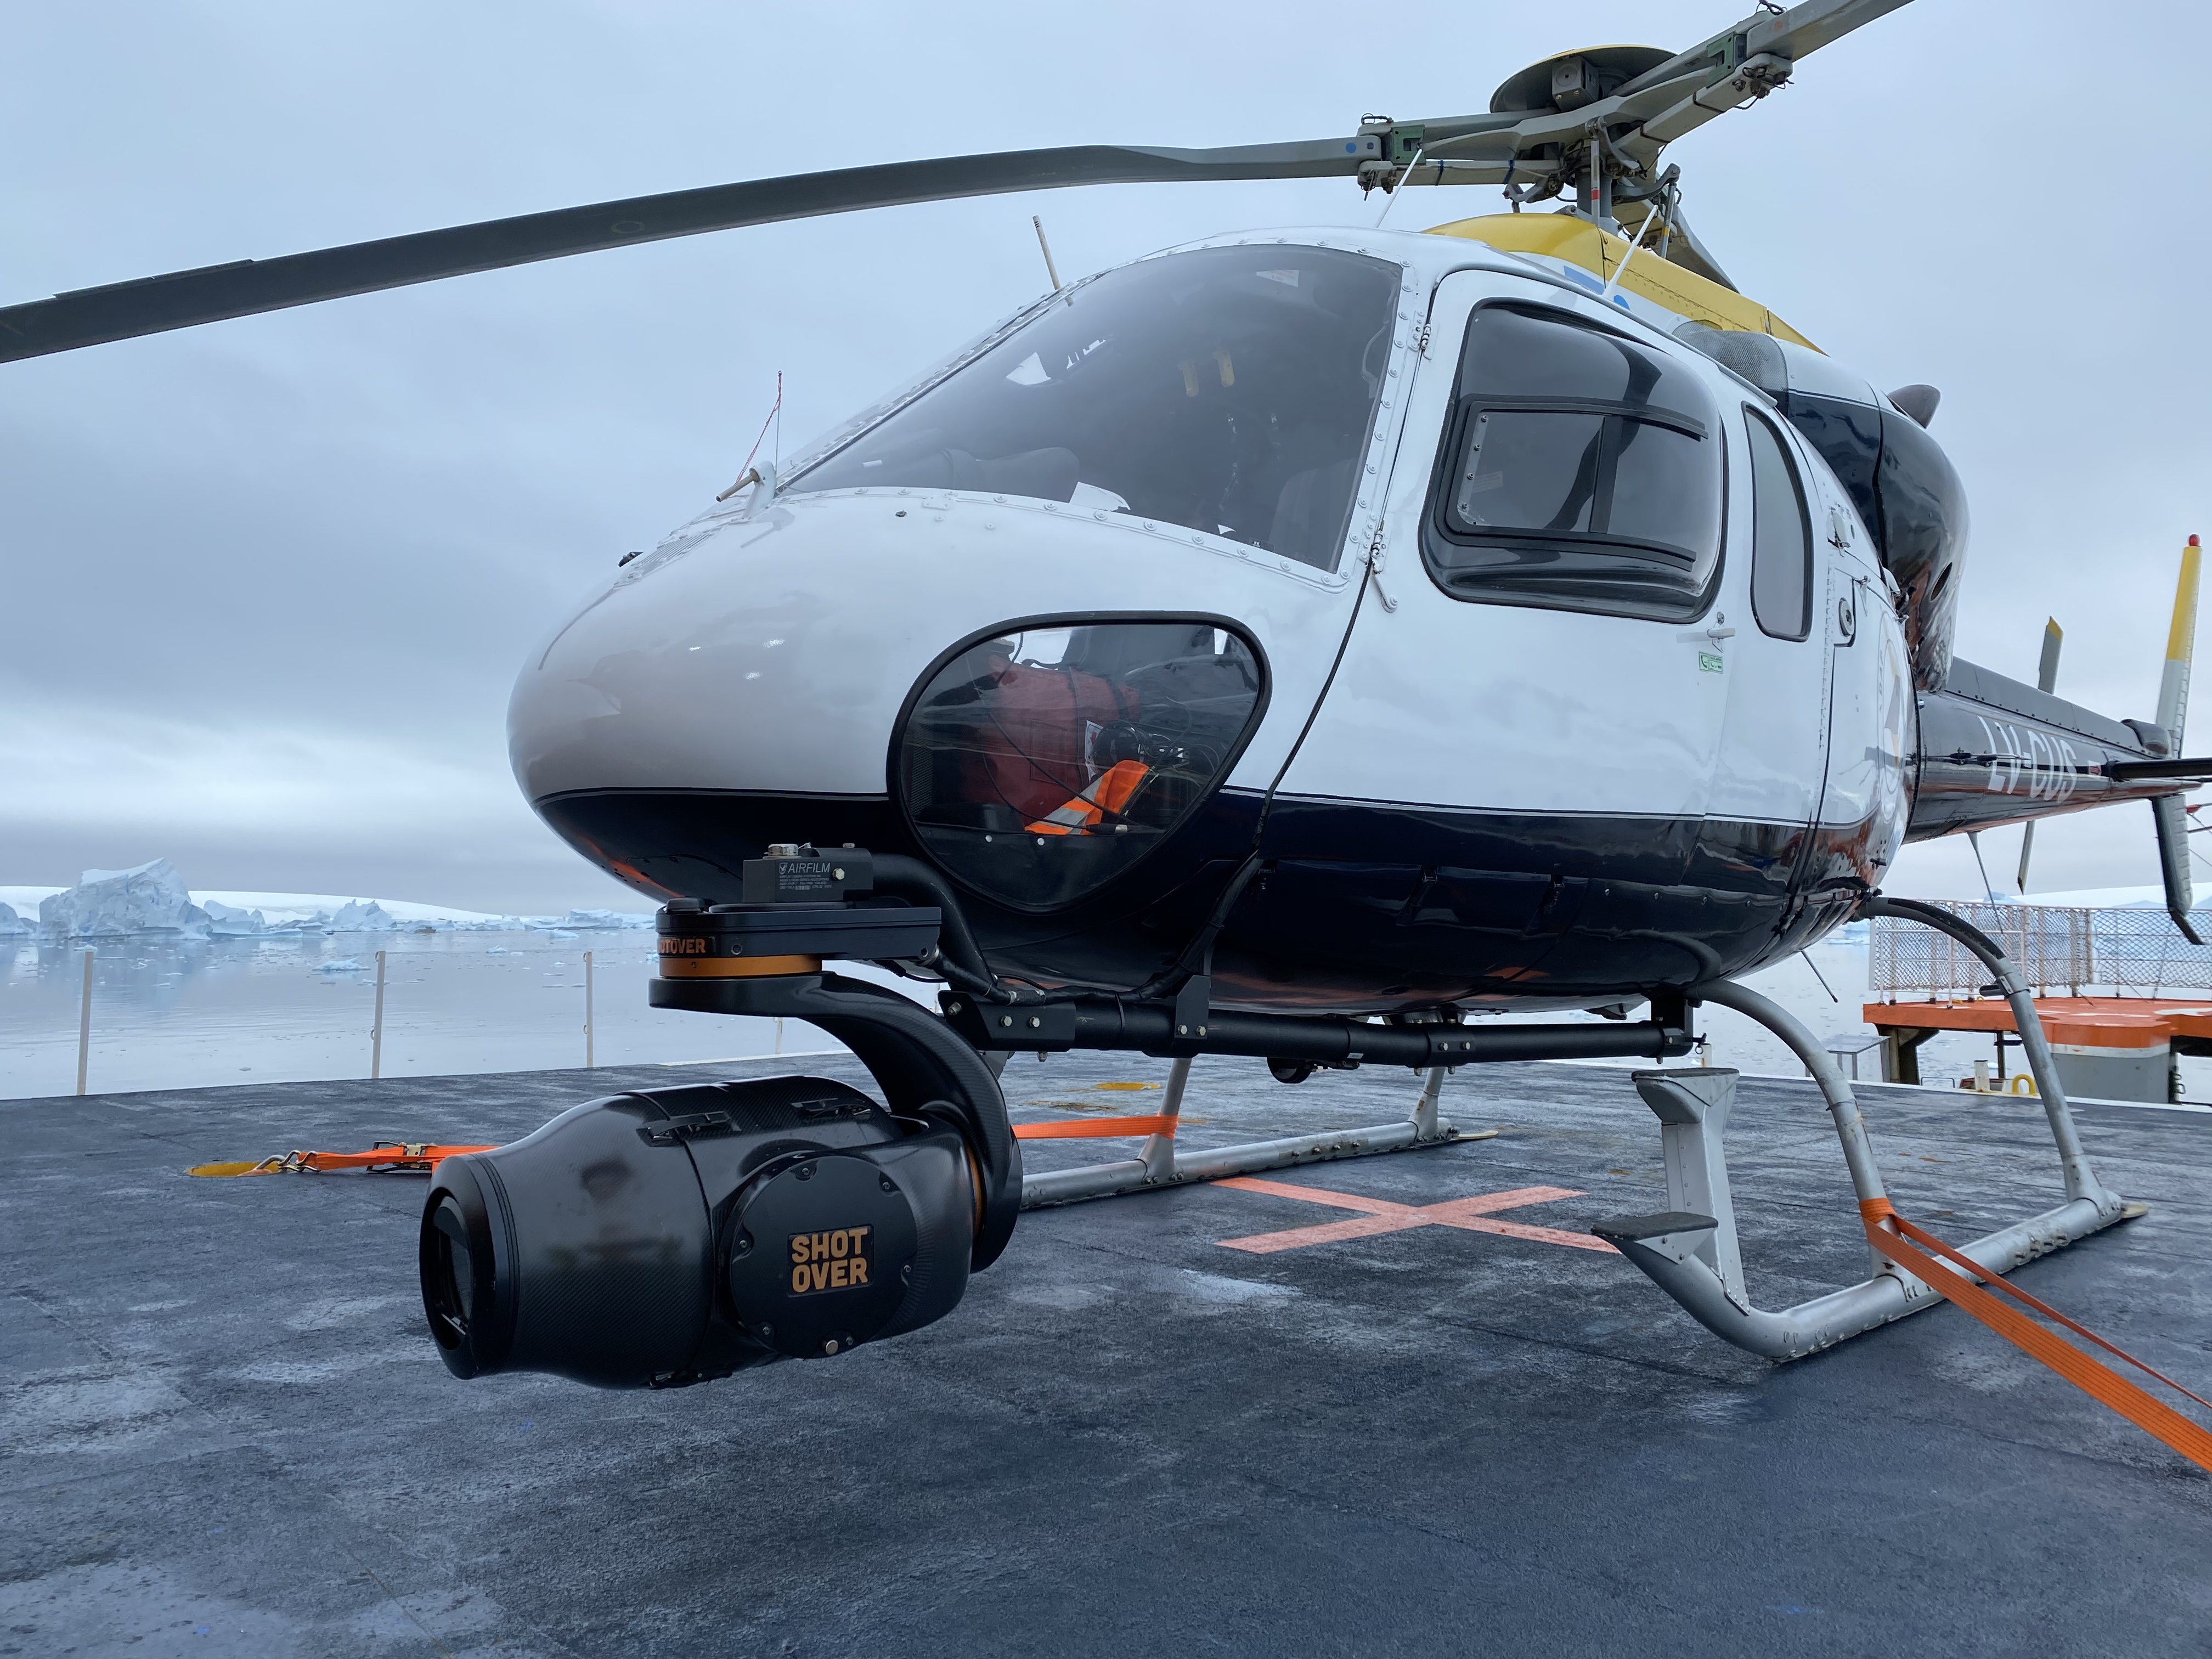 SHOTOVER F1 in Antarctica with Aerial Director of Photography Mark Gerasimenko